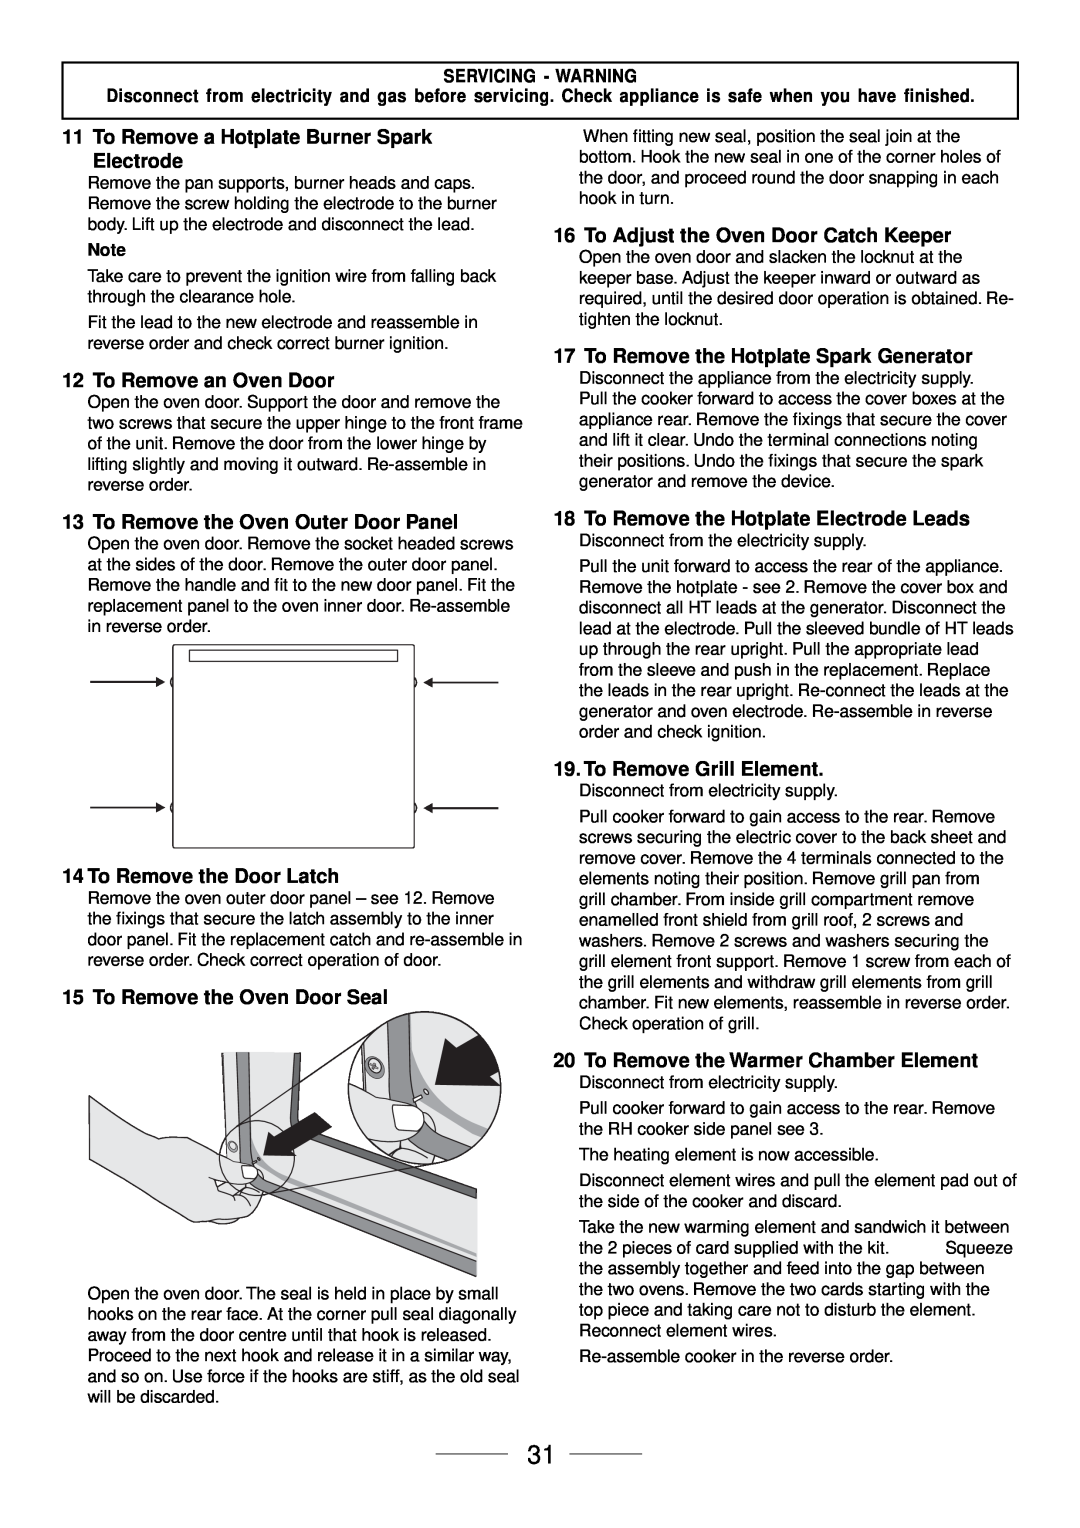 Maytag 110 installation instructions To Remove a Hotplate Burner Spark Electrode 